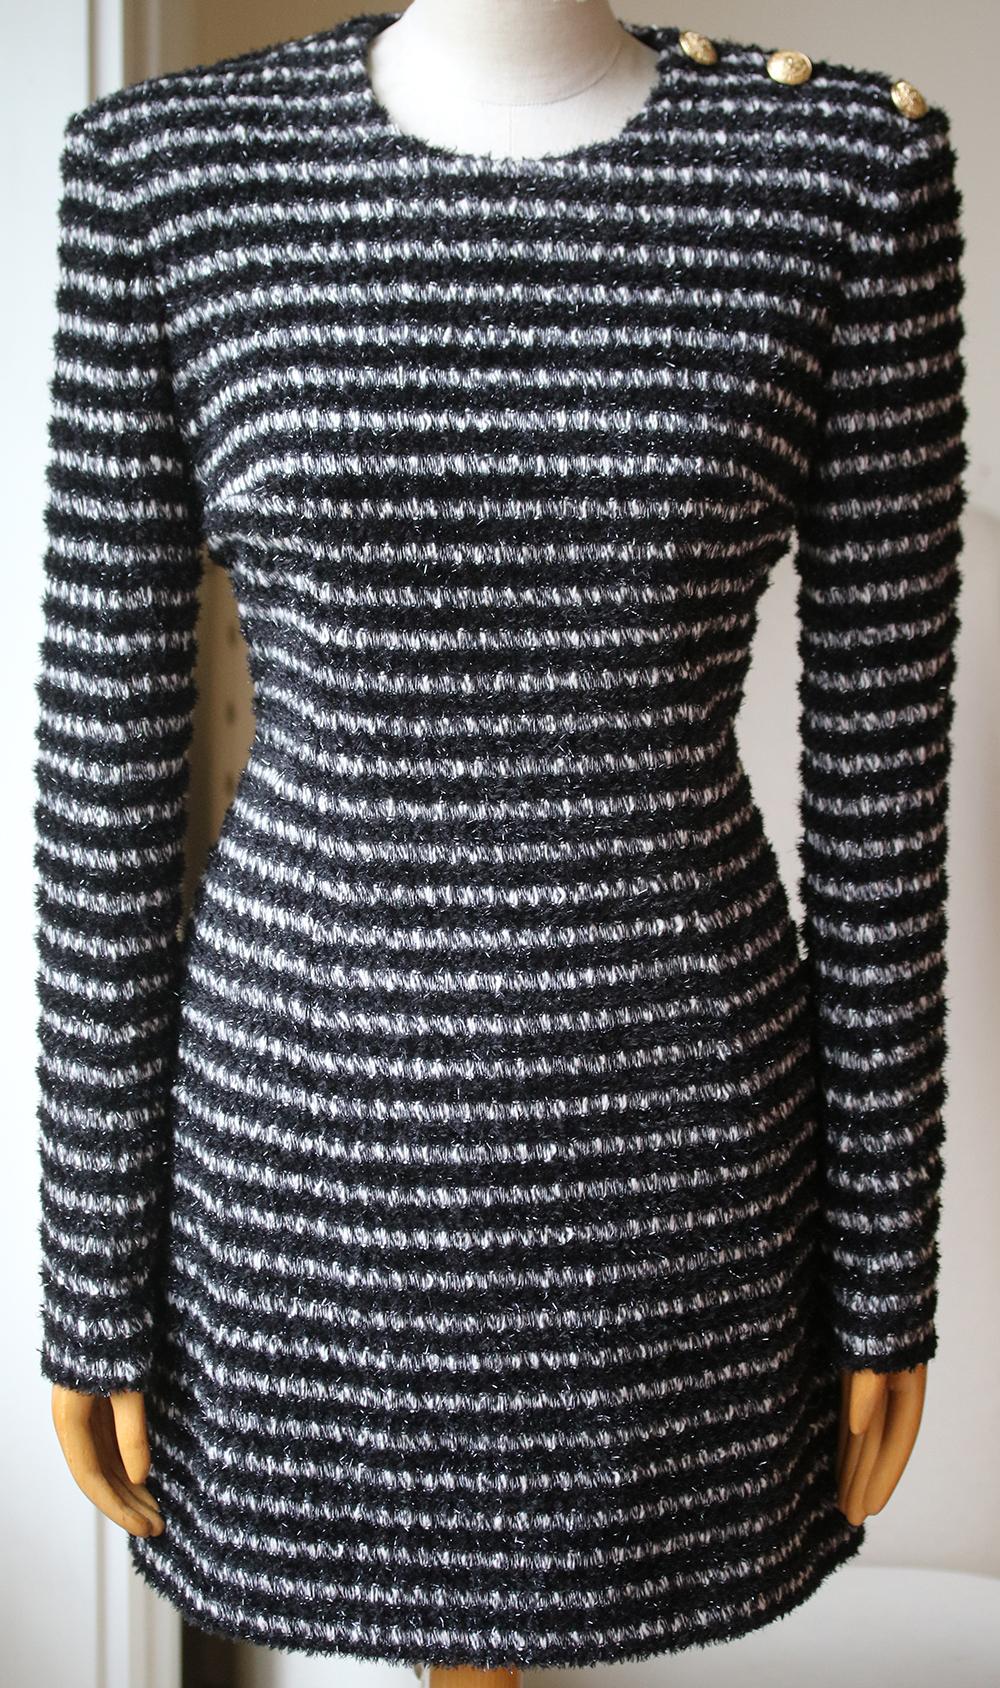 Balmain long sleeves striped tweed dress in black and white. Signature logo embossed buttons at shoulder. Gold toned zip closure on the back. Padded shoulders. Composition: 57% polyester, 40% cotton, 3% elastane.

Size: FR 42 (UK 14, US 10, IT